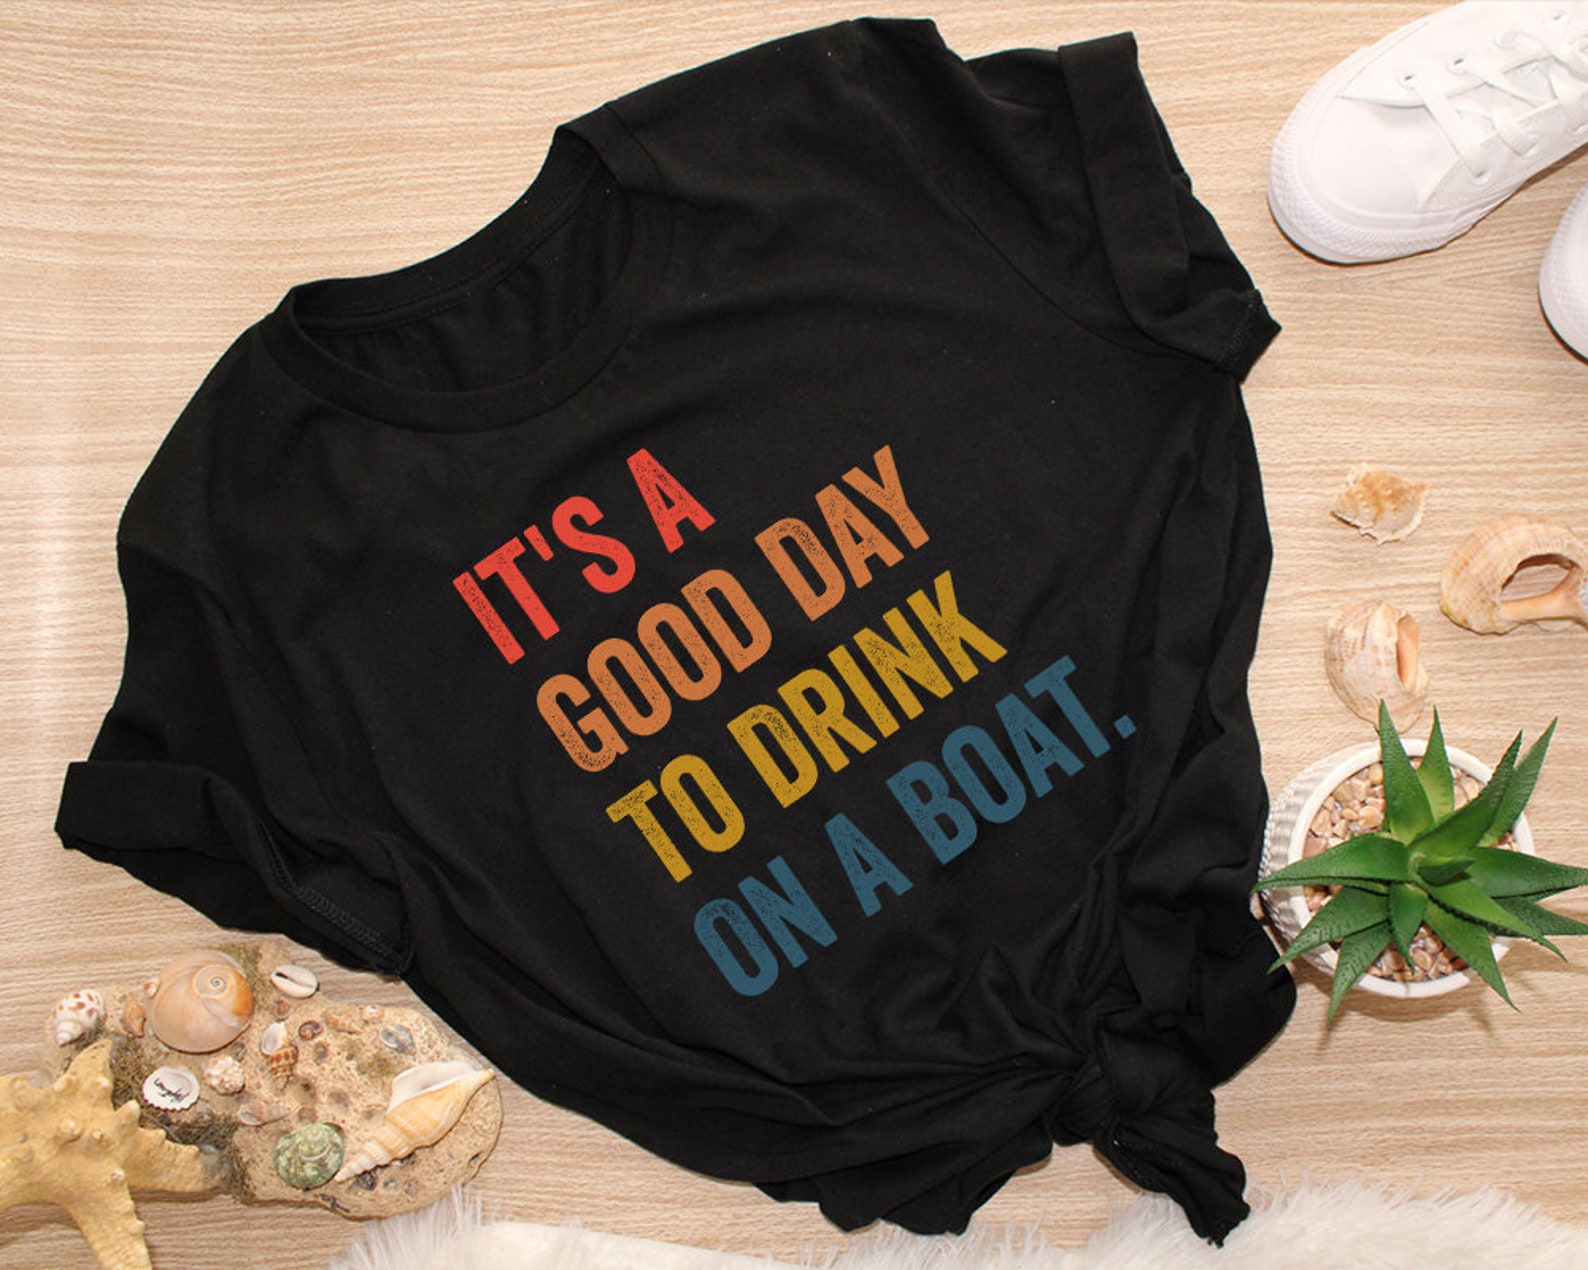 It's A Good Day to Drink on A Boat Shirt Cruise Shirt - Etsy